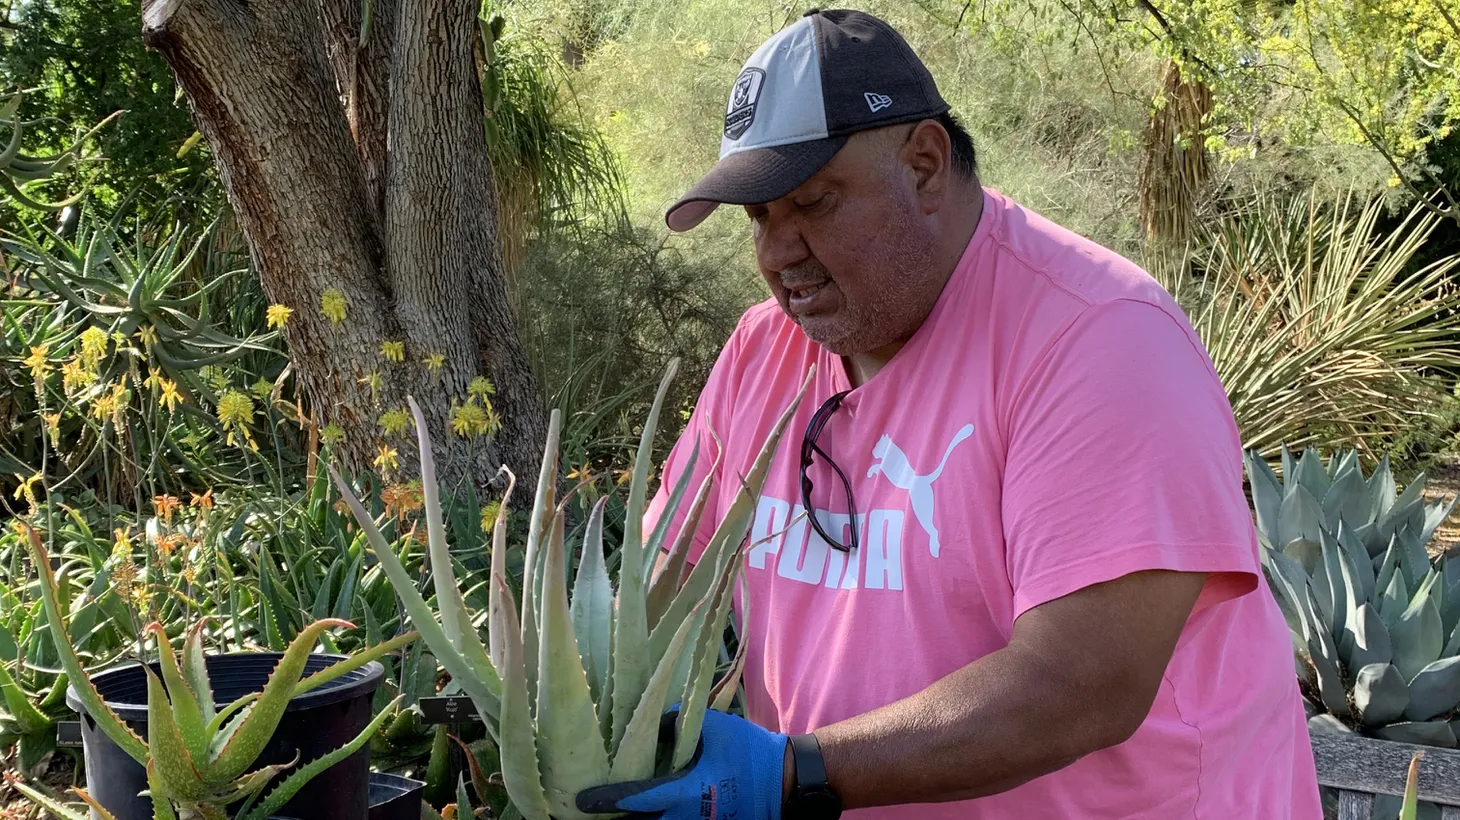 “Even though many people may think very little of being a gardener, it’s not like I’m an architect or one that flies to the moon. I feel pride in what I do,” says gardener Faustino Benites.